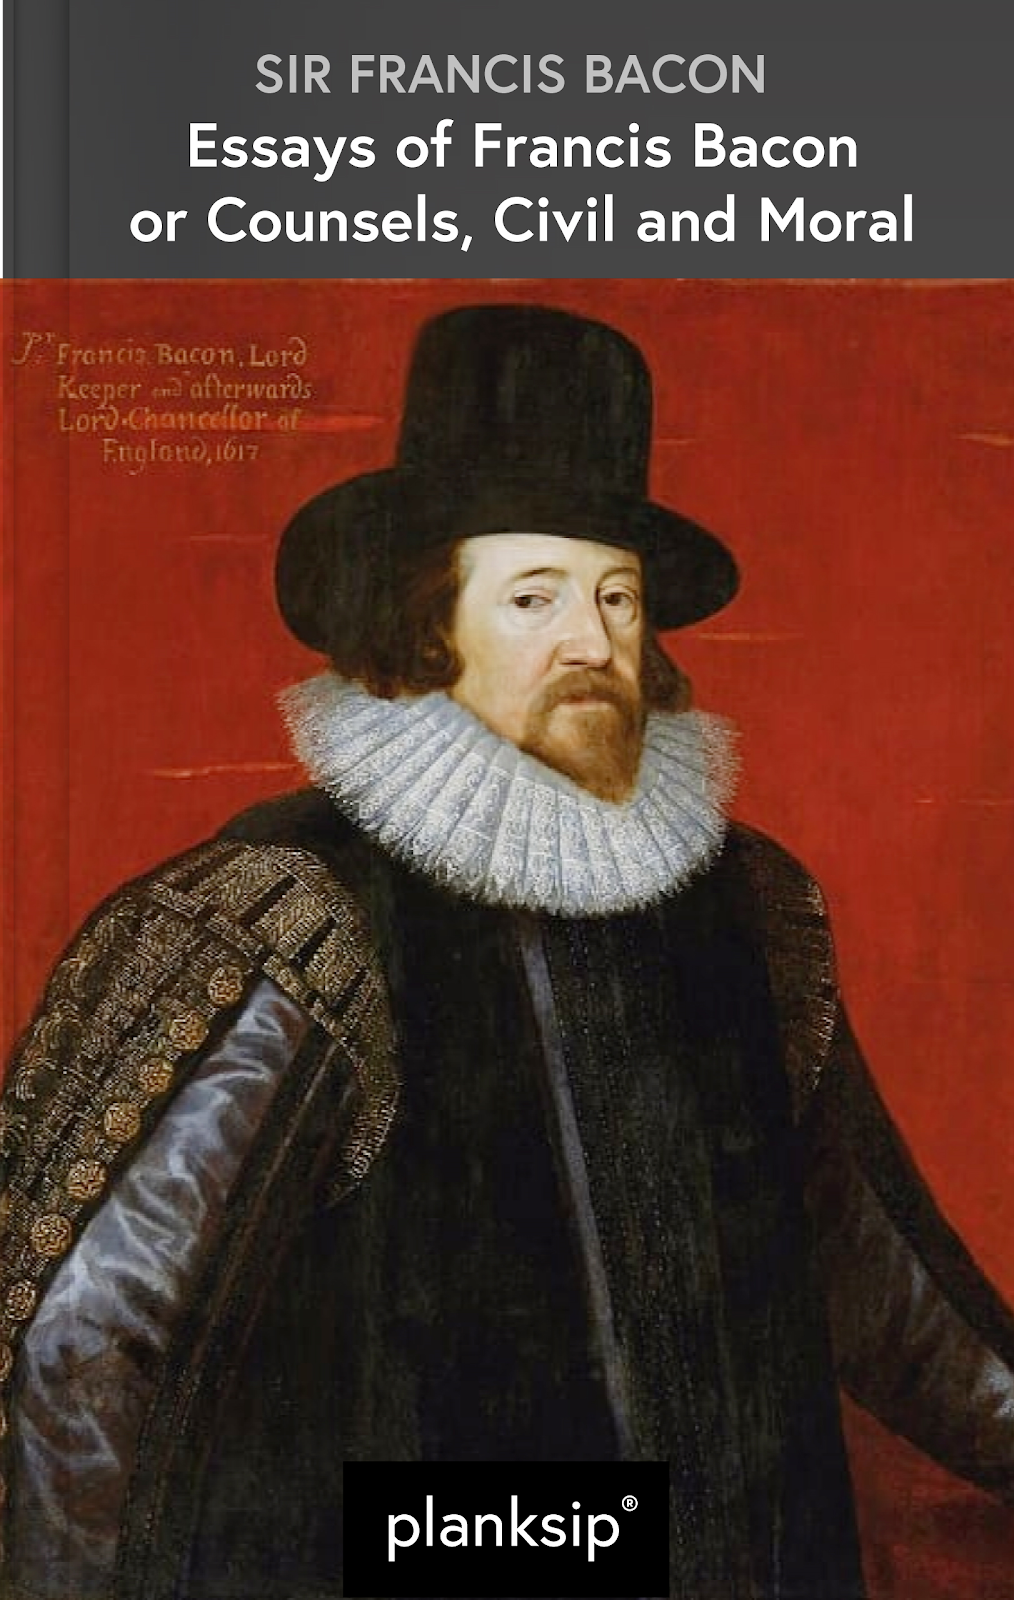 Essays of Francis Bacon by Sir Francis Bacon (1561-1626). Published by planksip